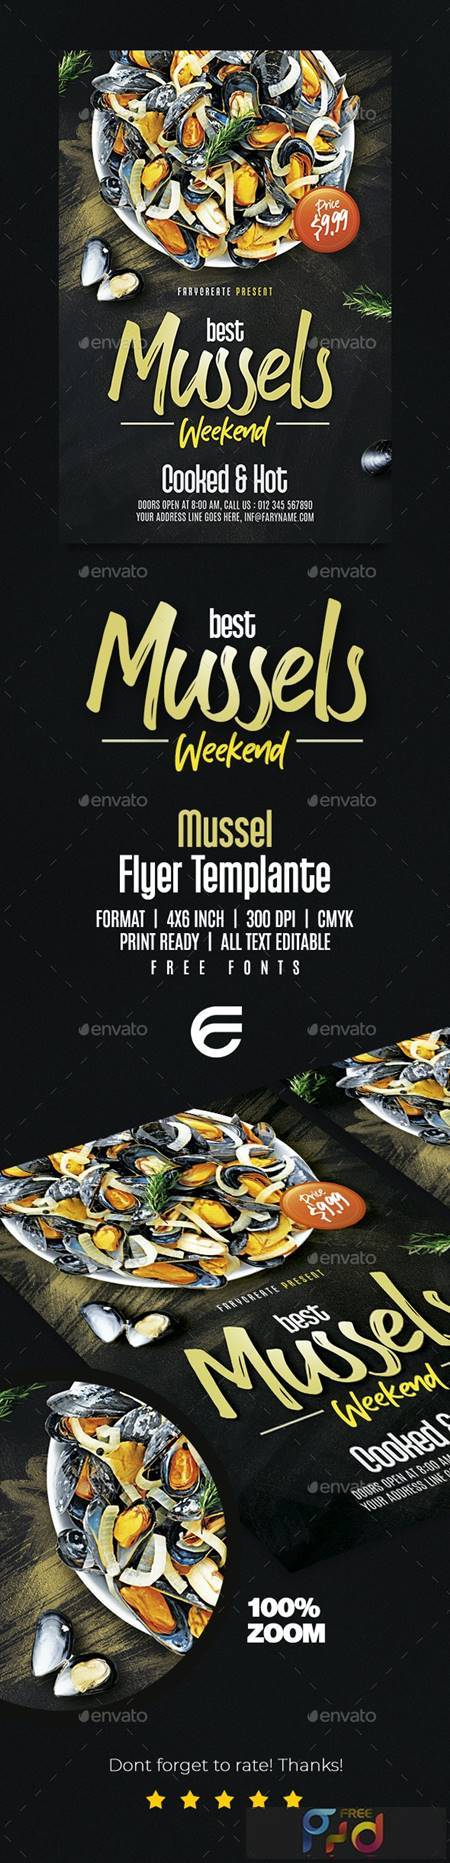 FreePsdVn.com 2009128 TEMPLATE mussels seafood flyer template 26093306